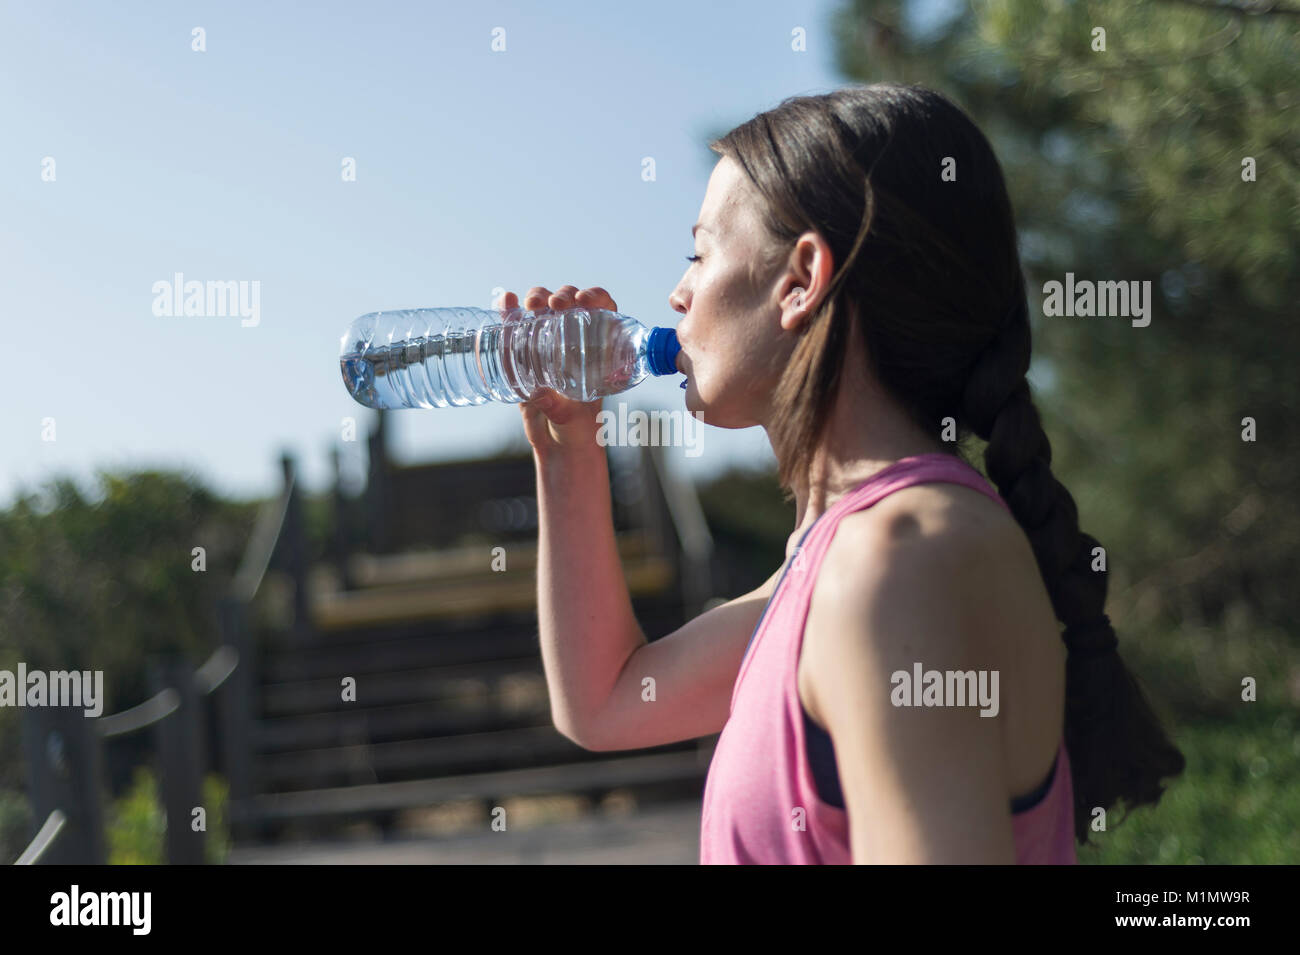 woman drinking water from a bottle after exercise. Outdoors. Stock Photo